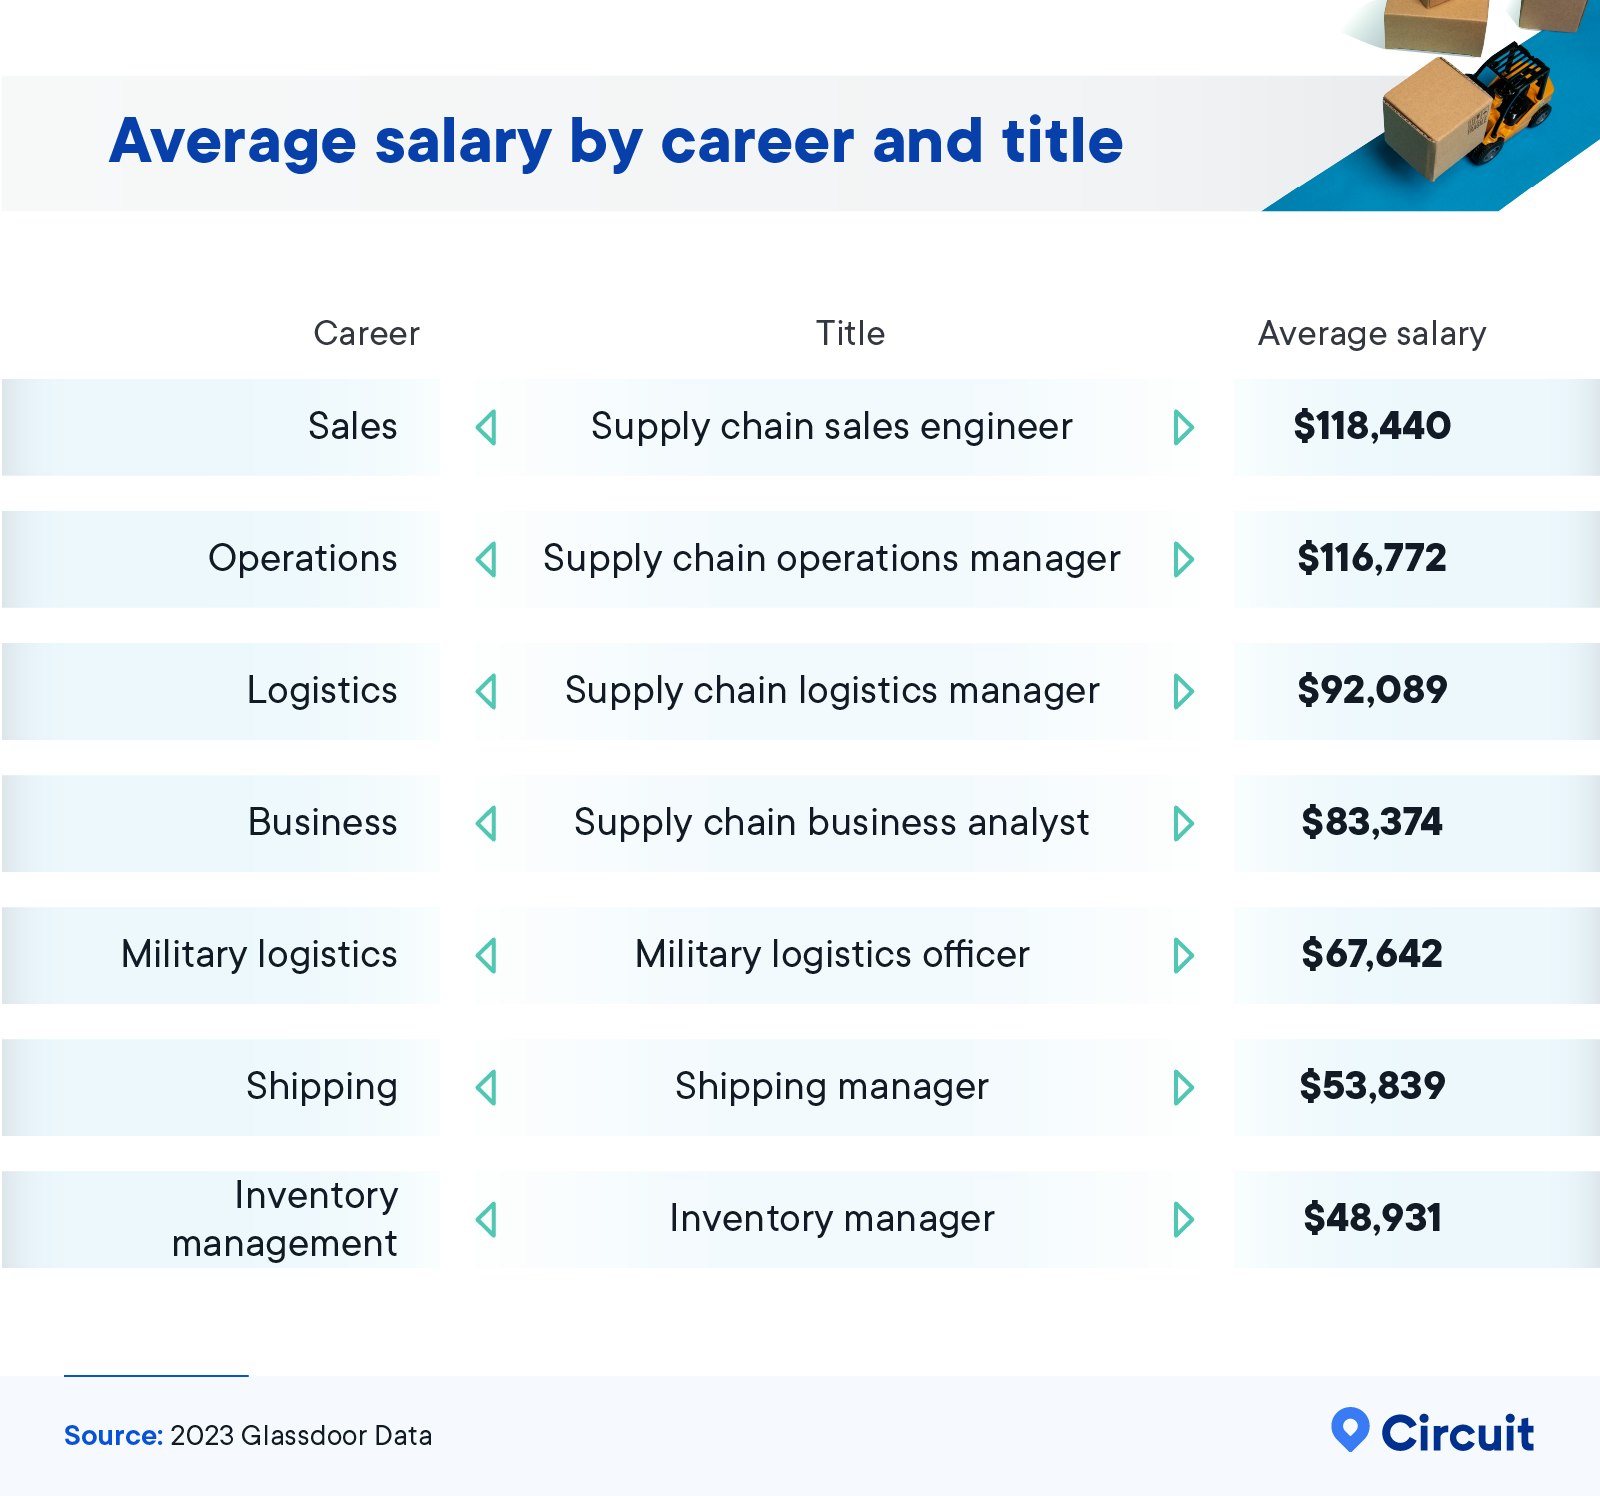 Average salary by career and title